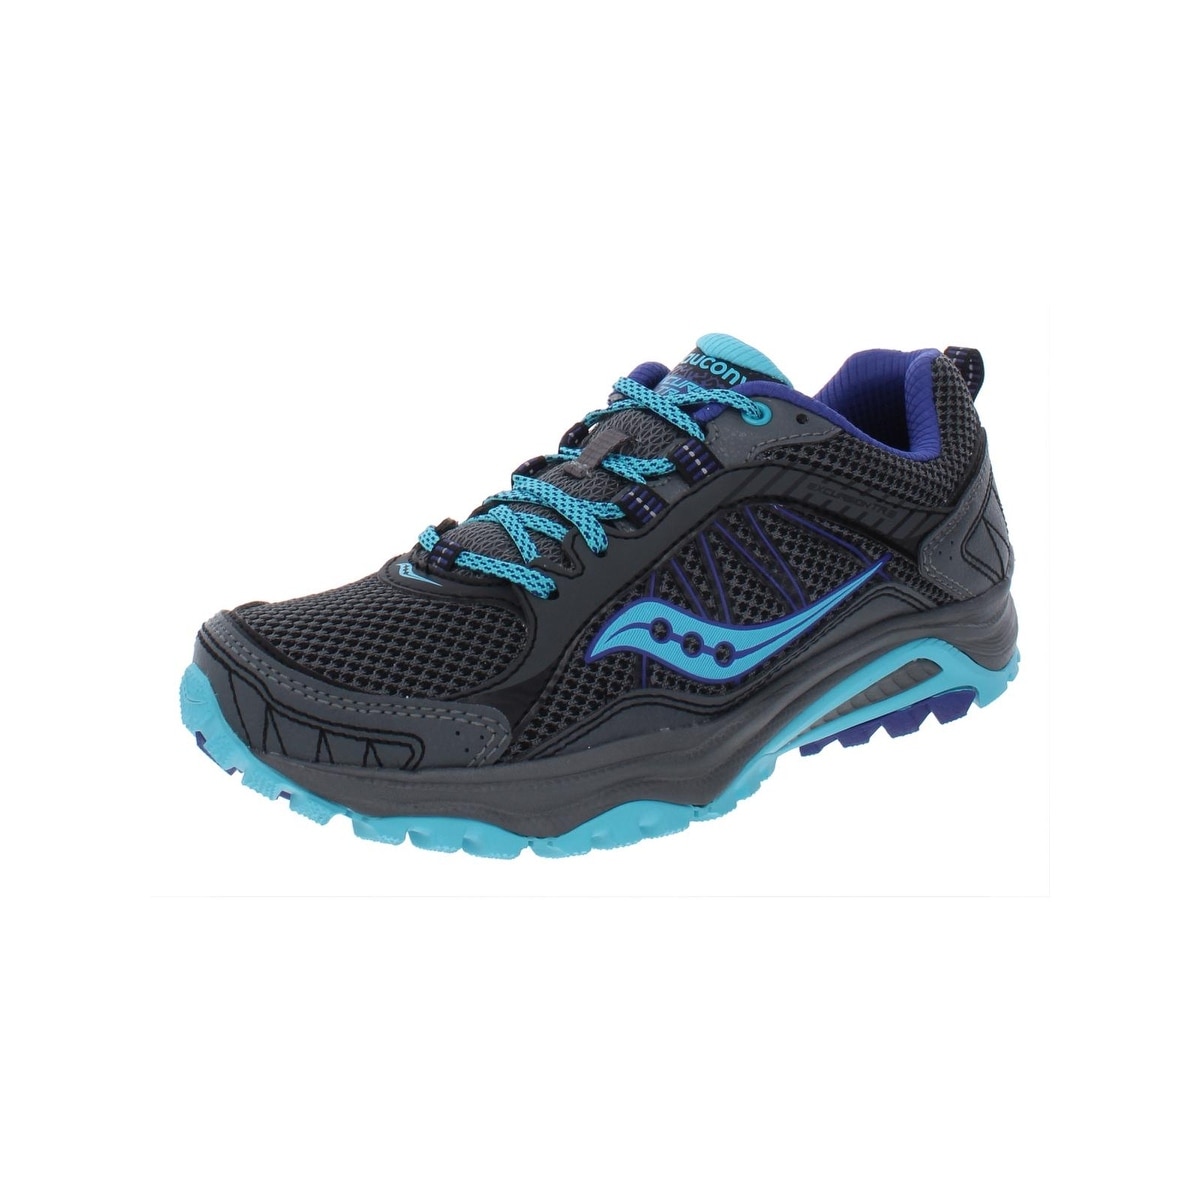 saucony excursion running shoes reviews